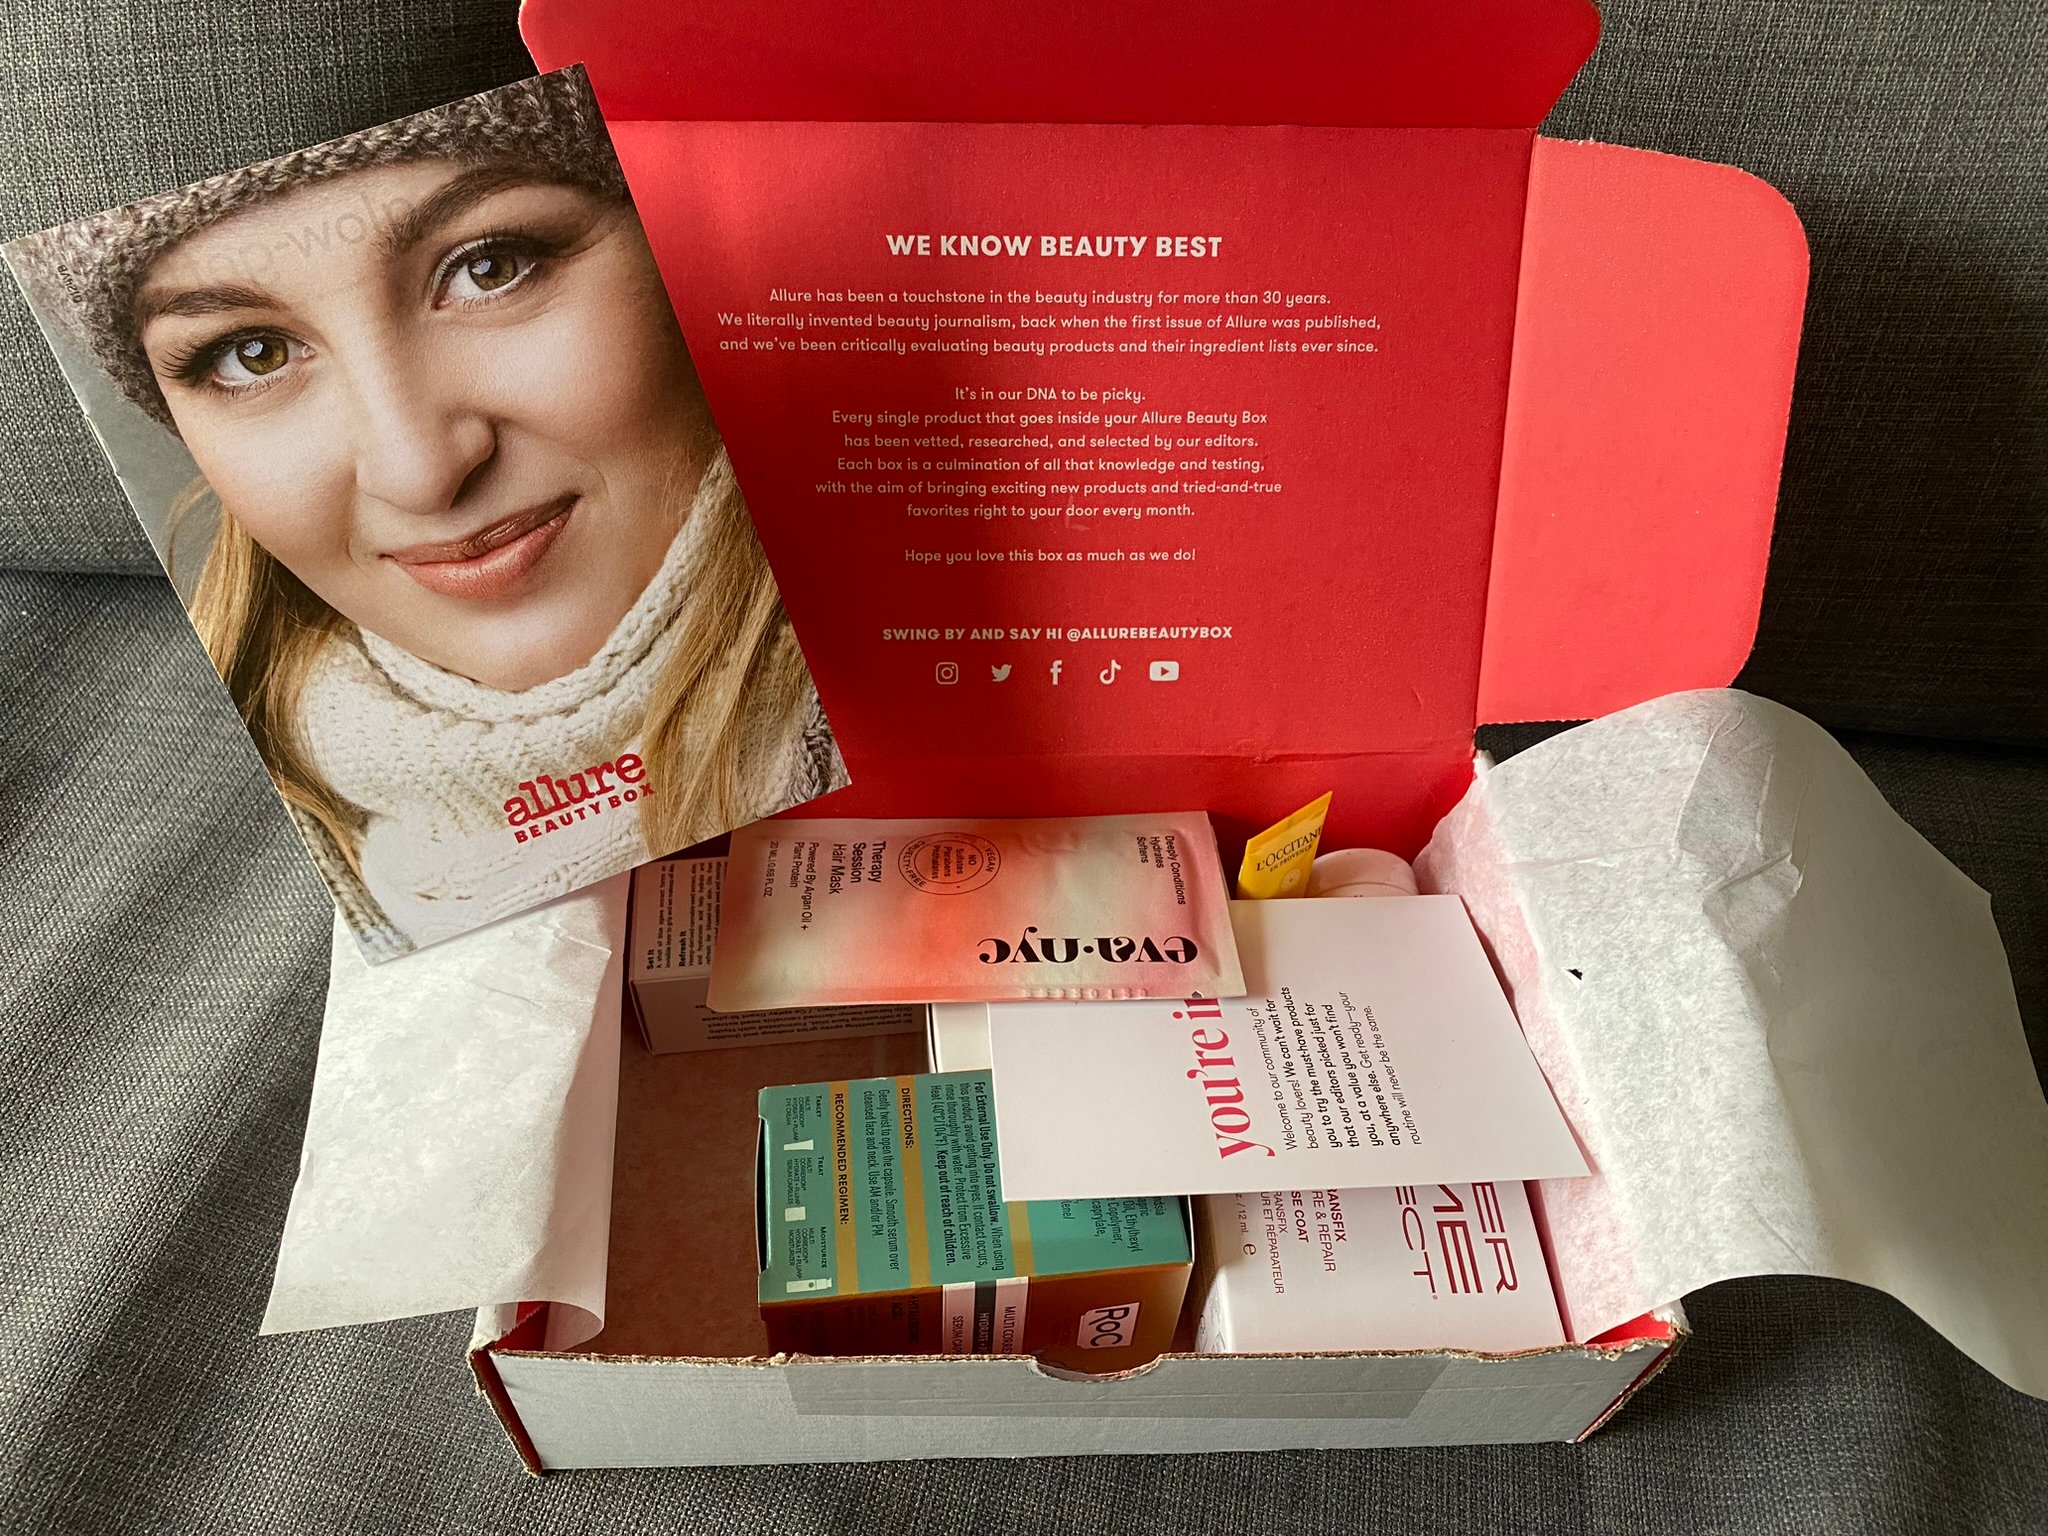 Allure Beauty Box subscription box filled with beauty and skincare products